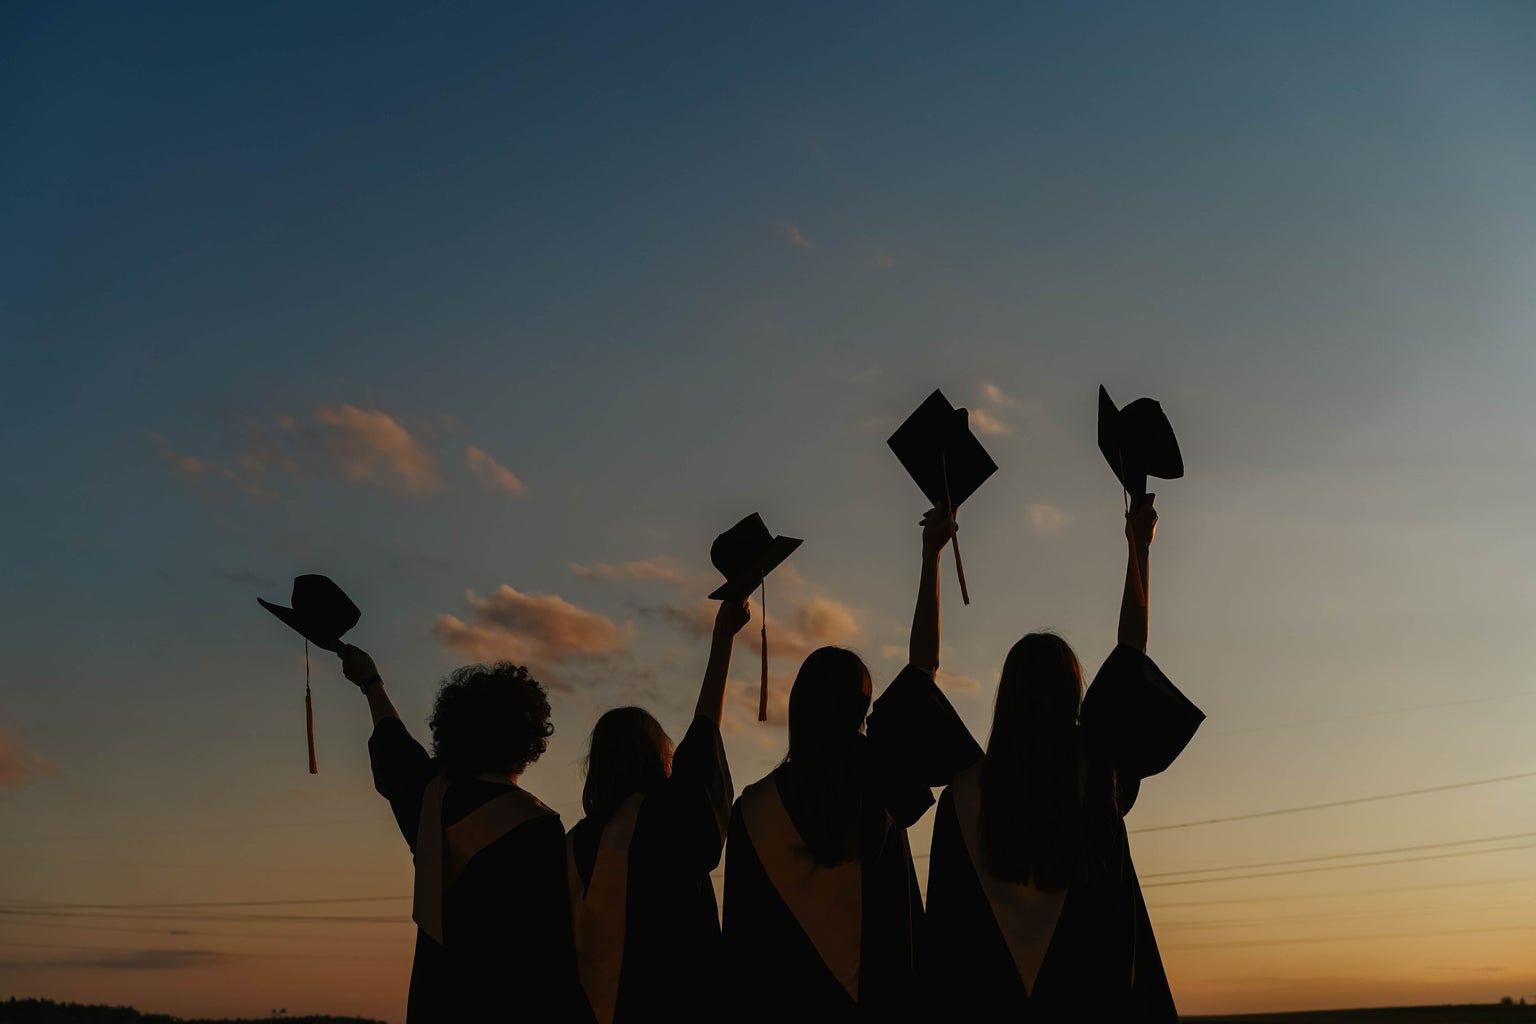 Silhouette of People Raising Their Graduation Hats against a sunset